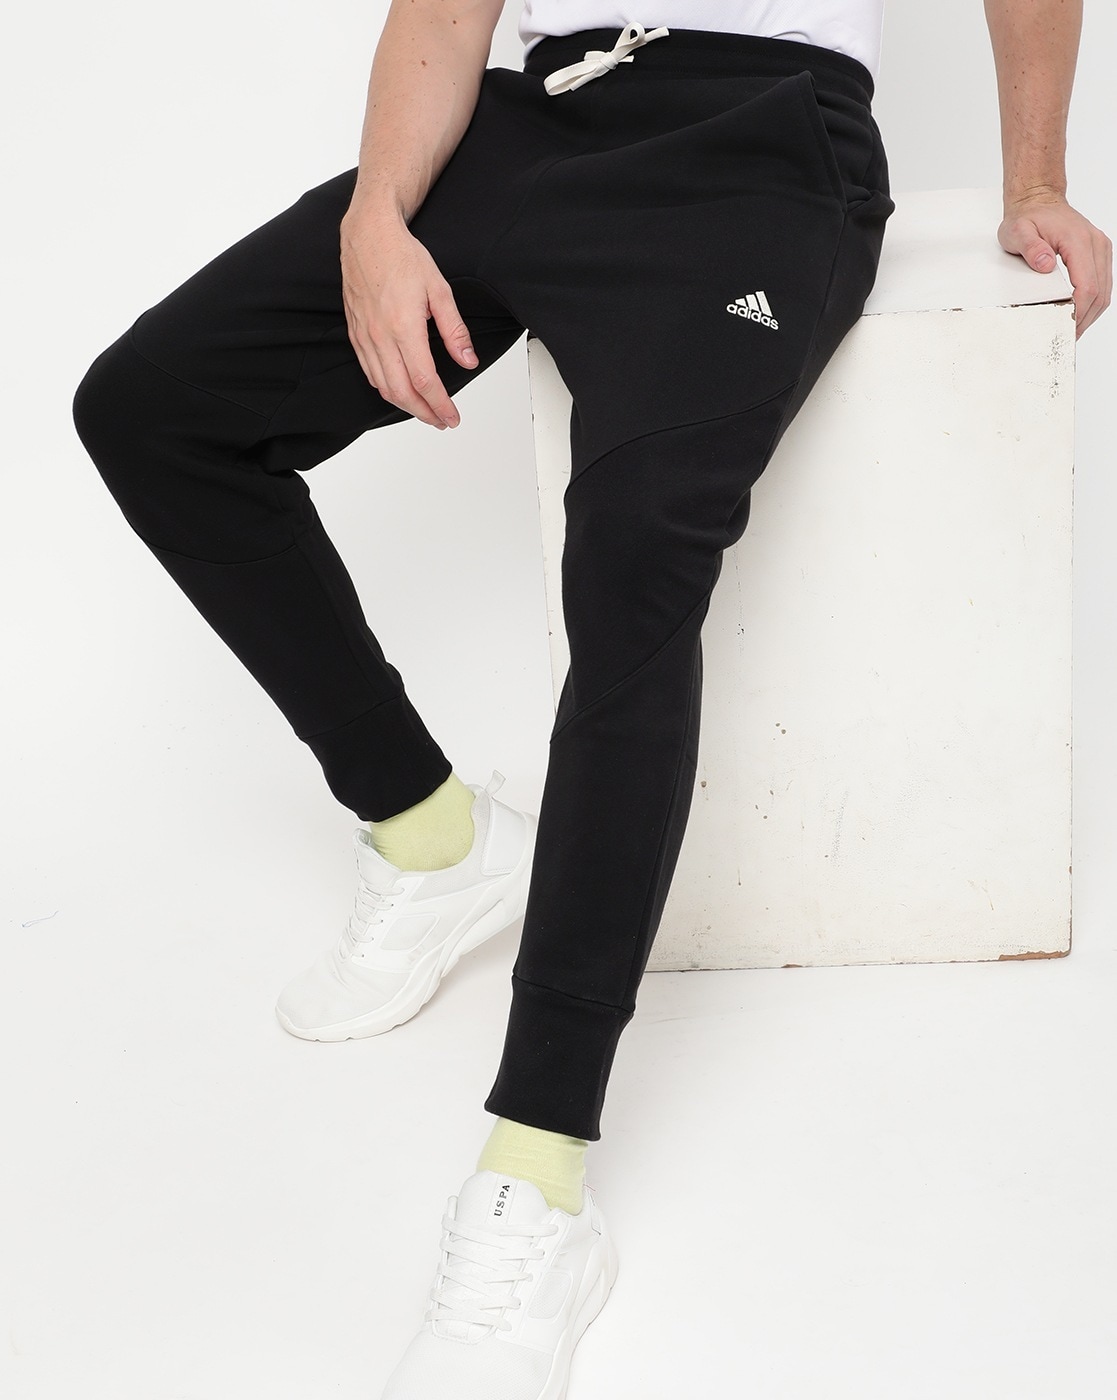 Top more than 82 adidas slim fit track pants latest - in.eteachers